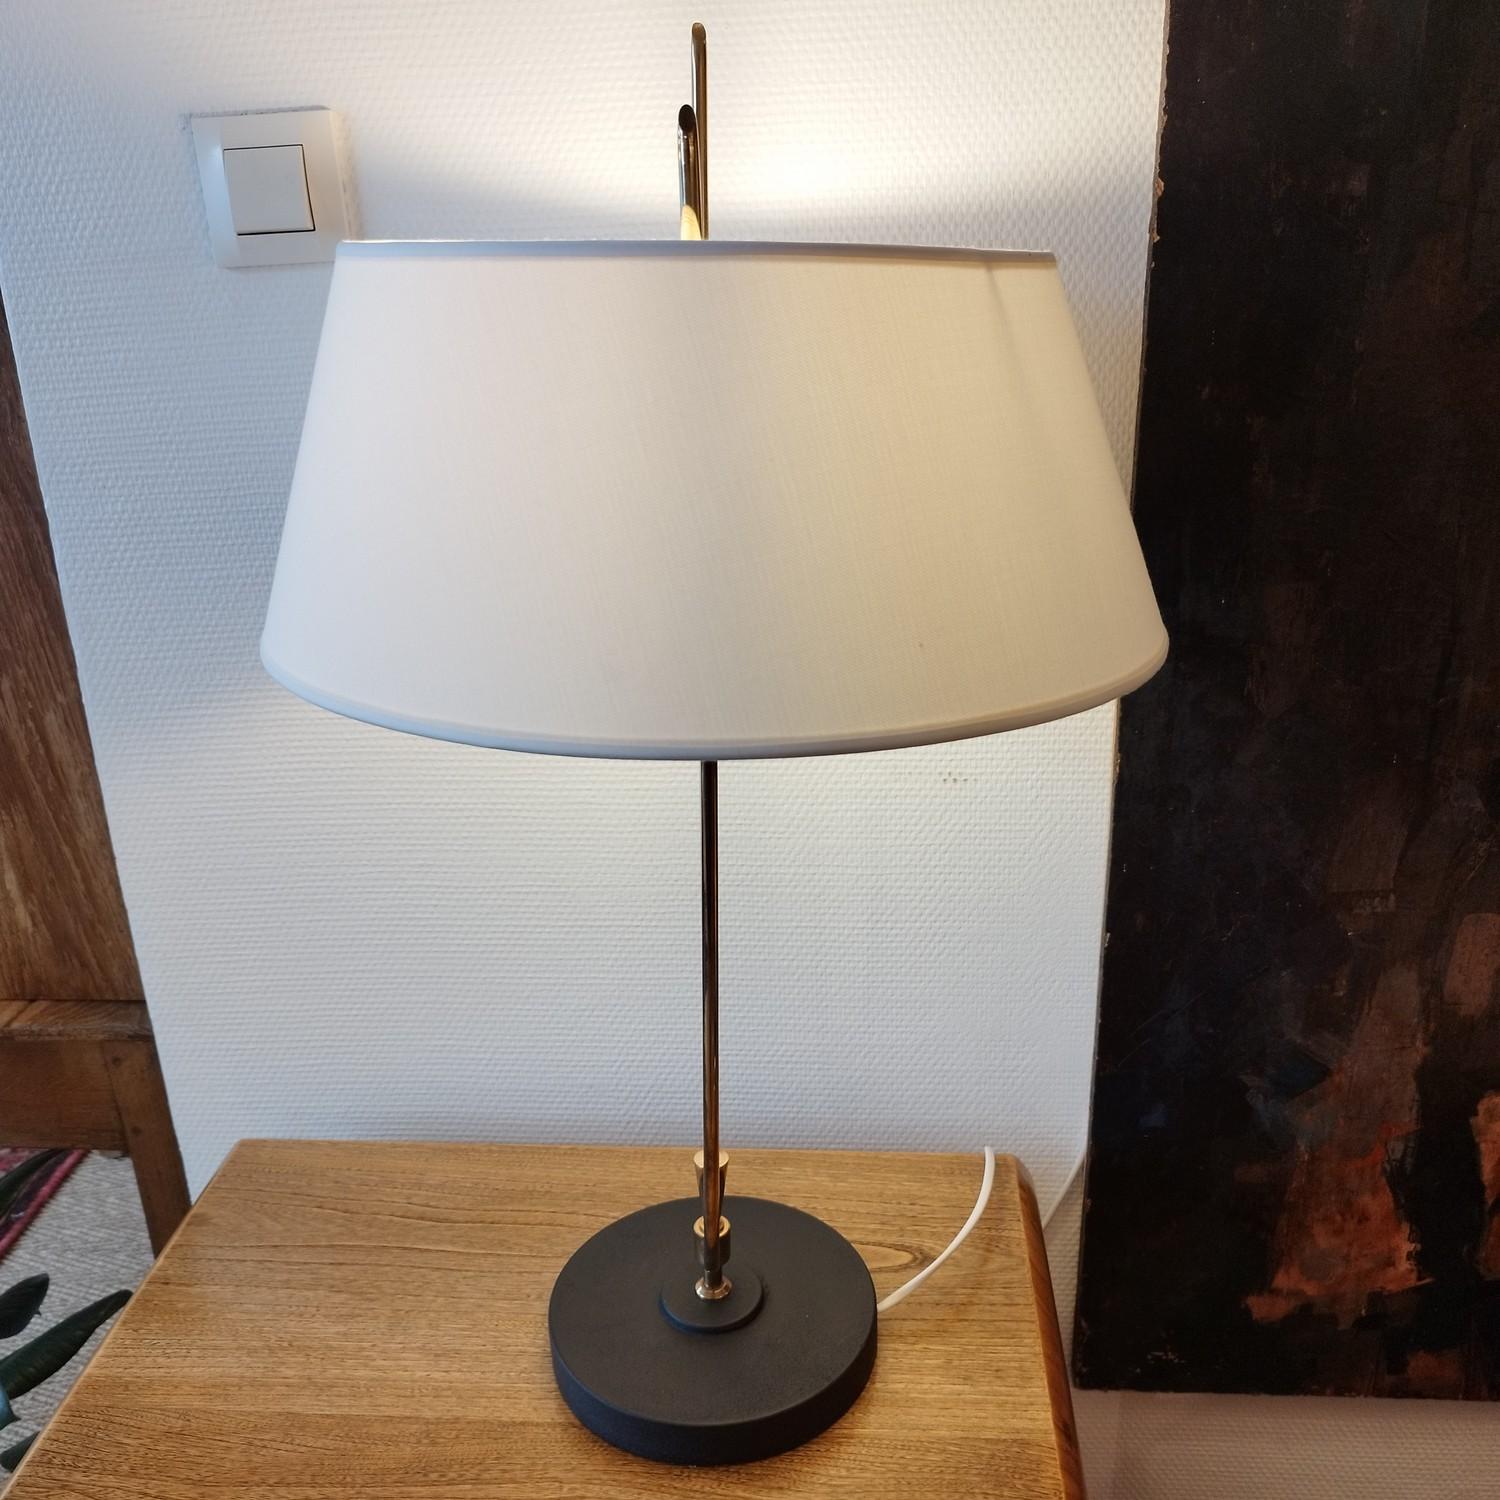 Tall and elegant desk lamp in brass and painted metal, probably by Maison Arlus or Lunel. The electricity has been verified, the lamp shade is new and custom made.
Dimensions of the lamp : 67cm tall, diameter of the base 18cm. Diameter of the lamp